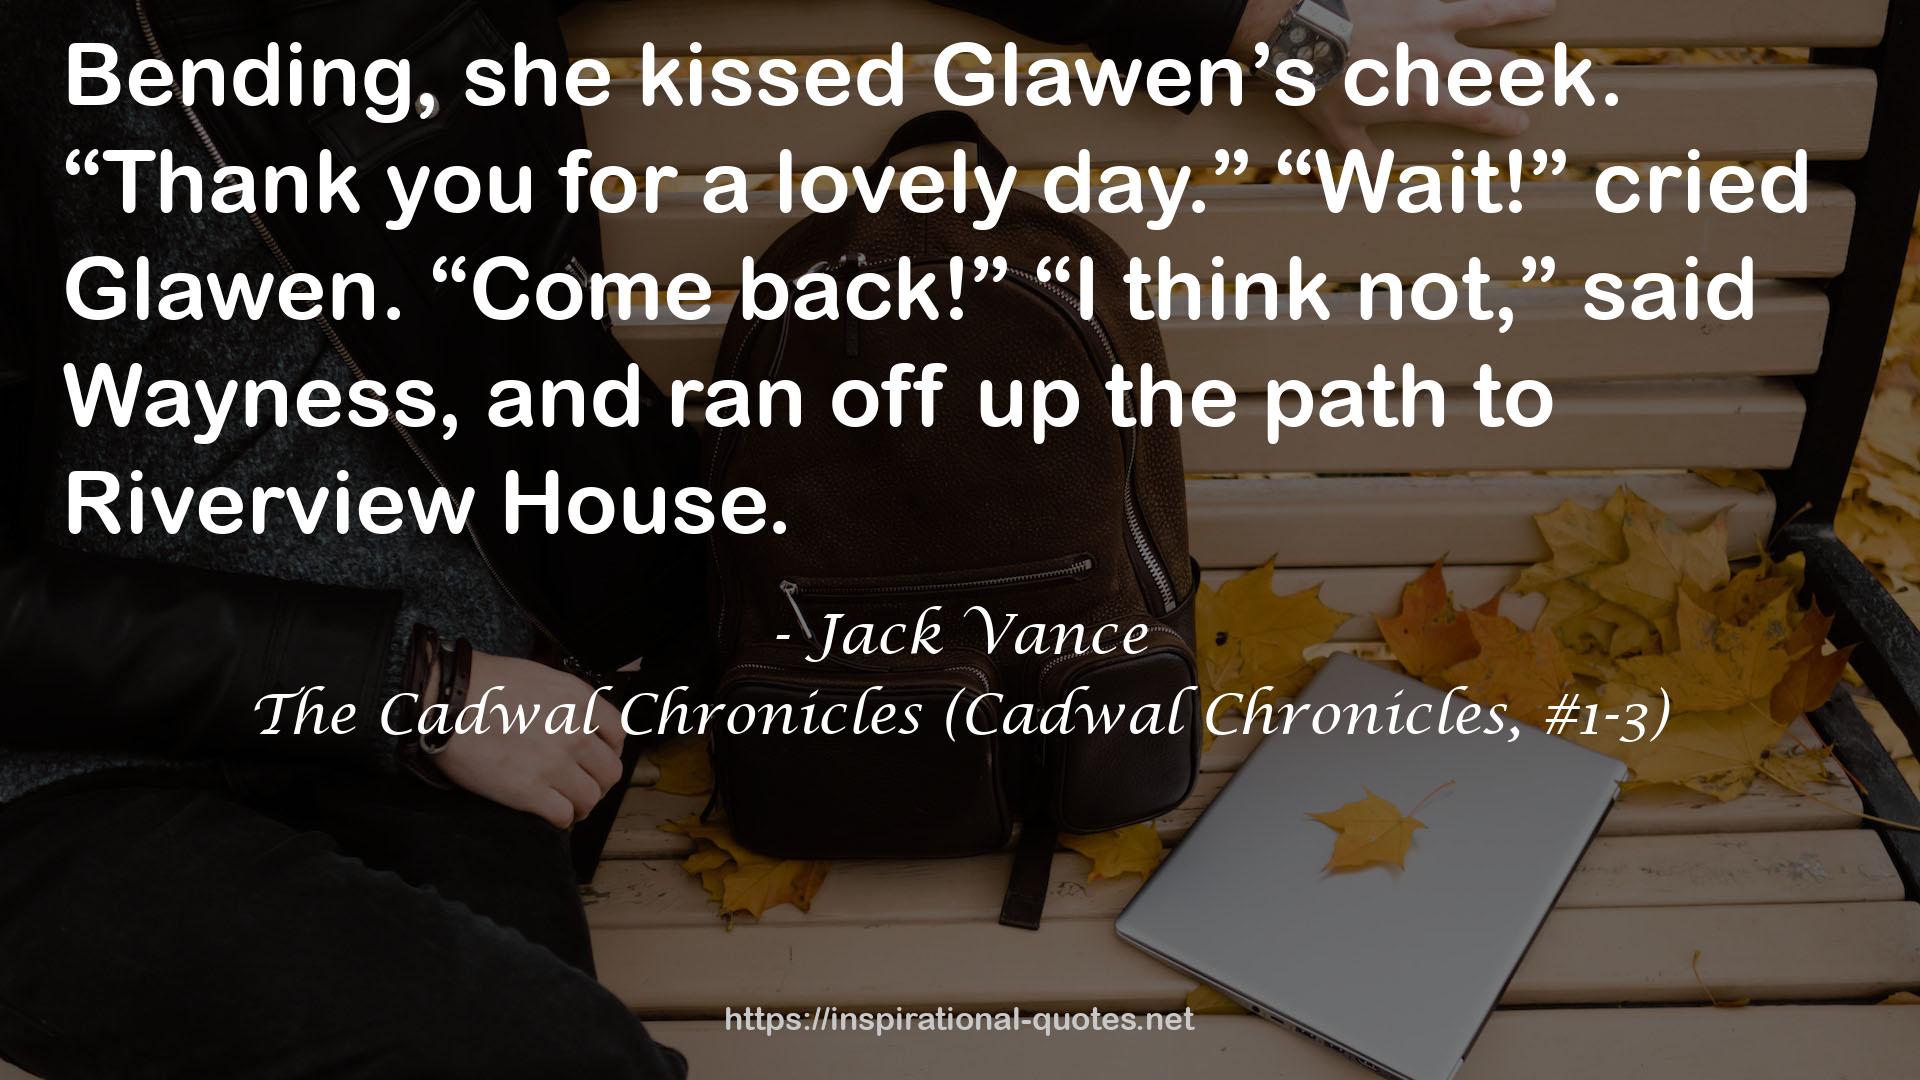 The Cadwal Chronicles (Cadwal Chronicles, #1-3) QUOTES